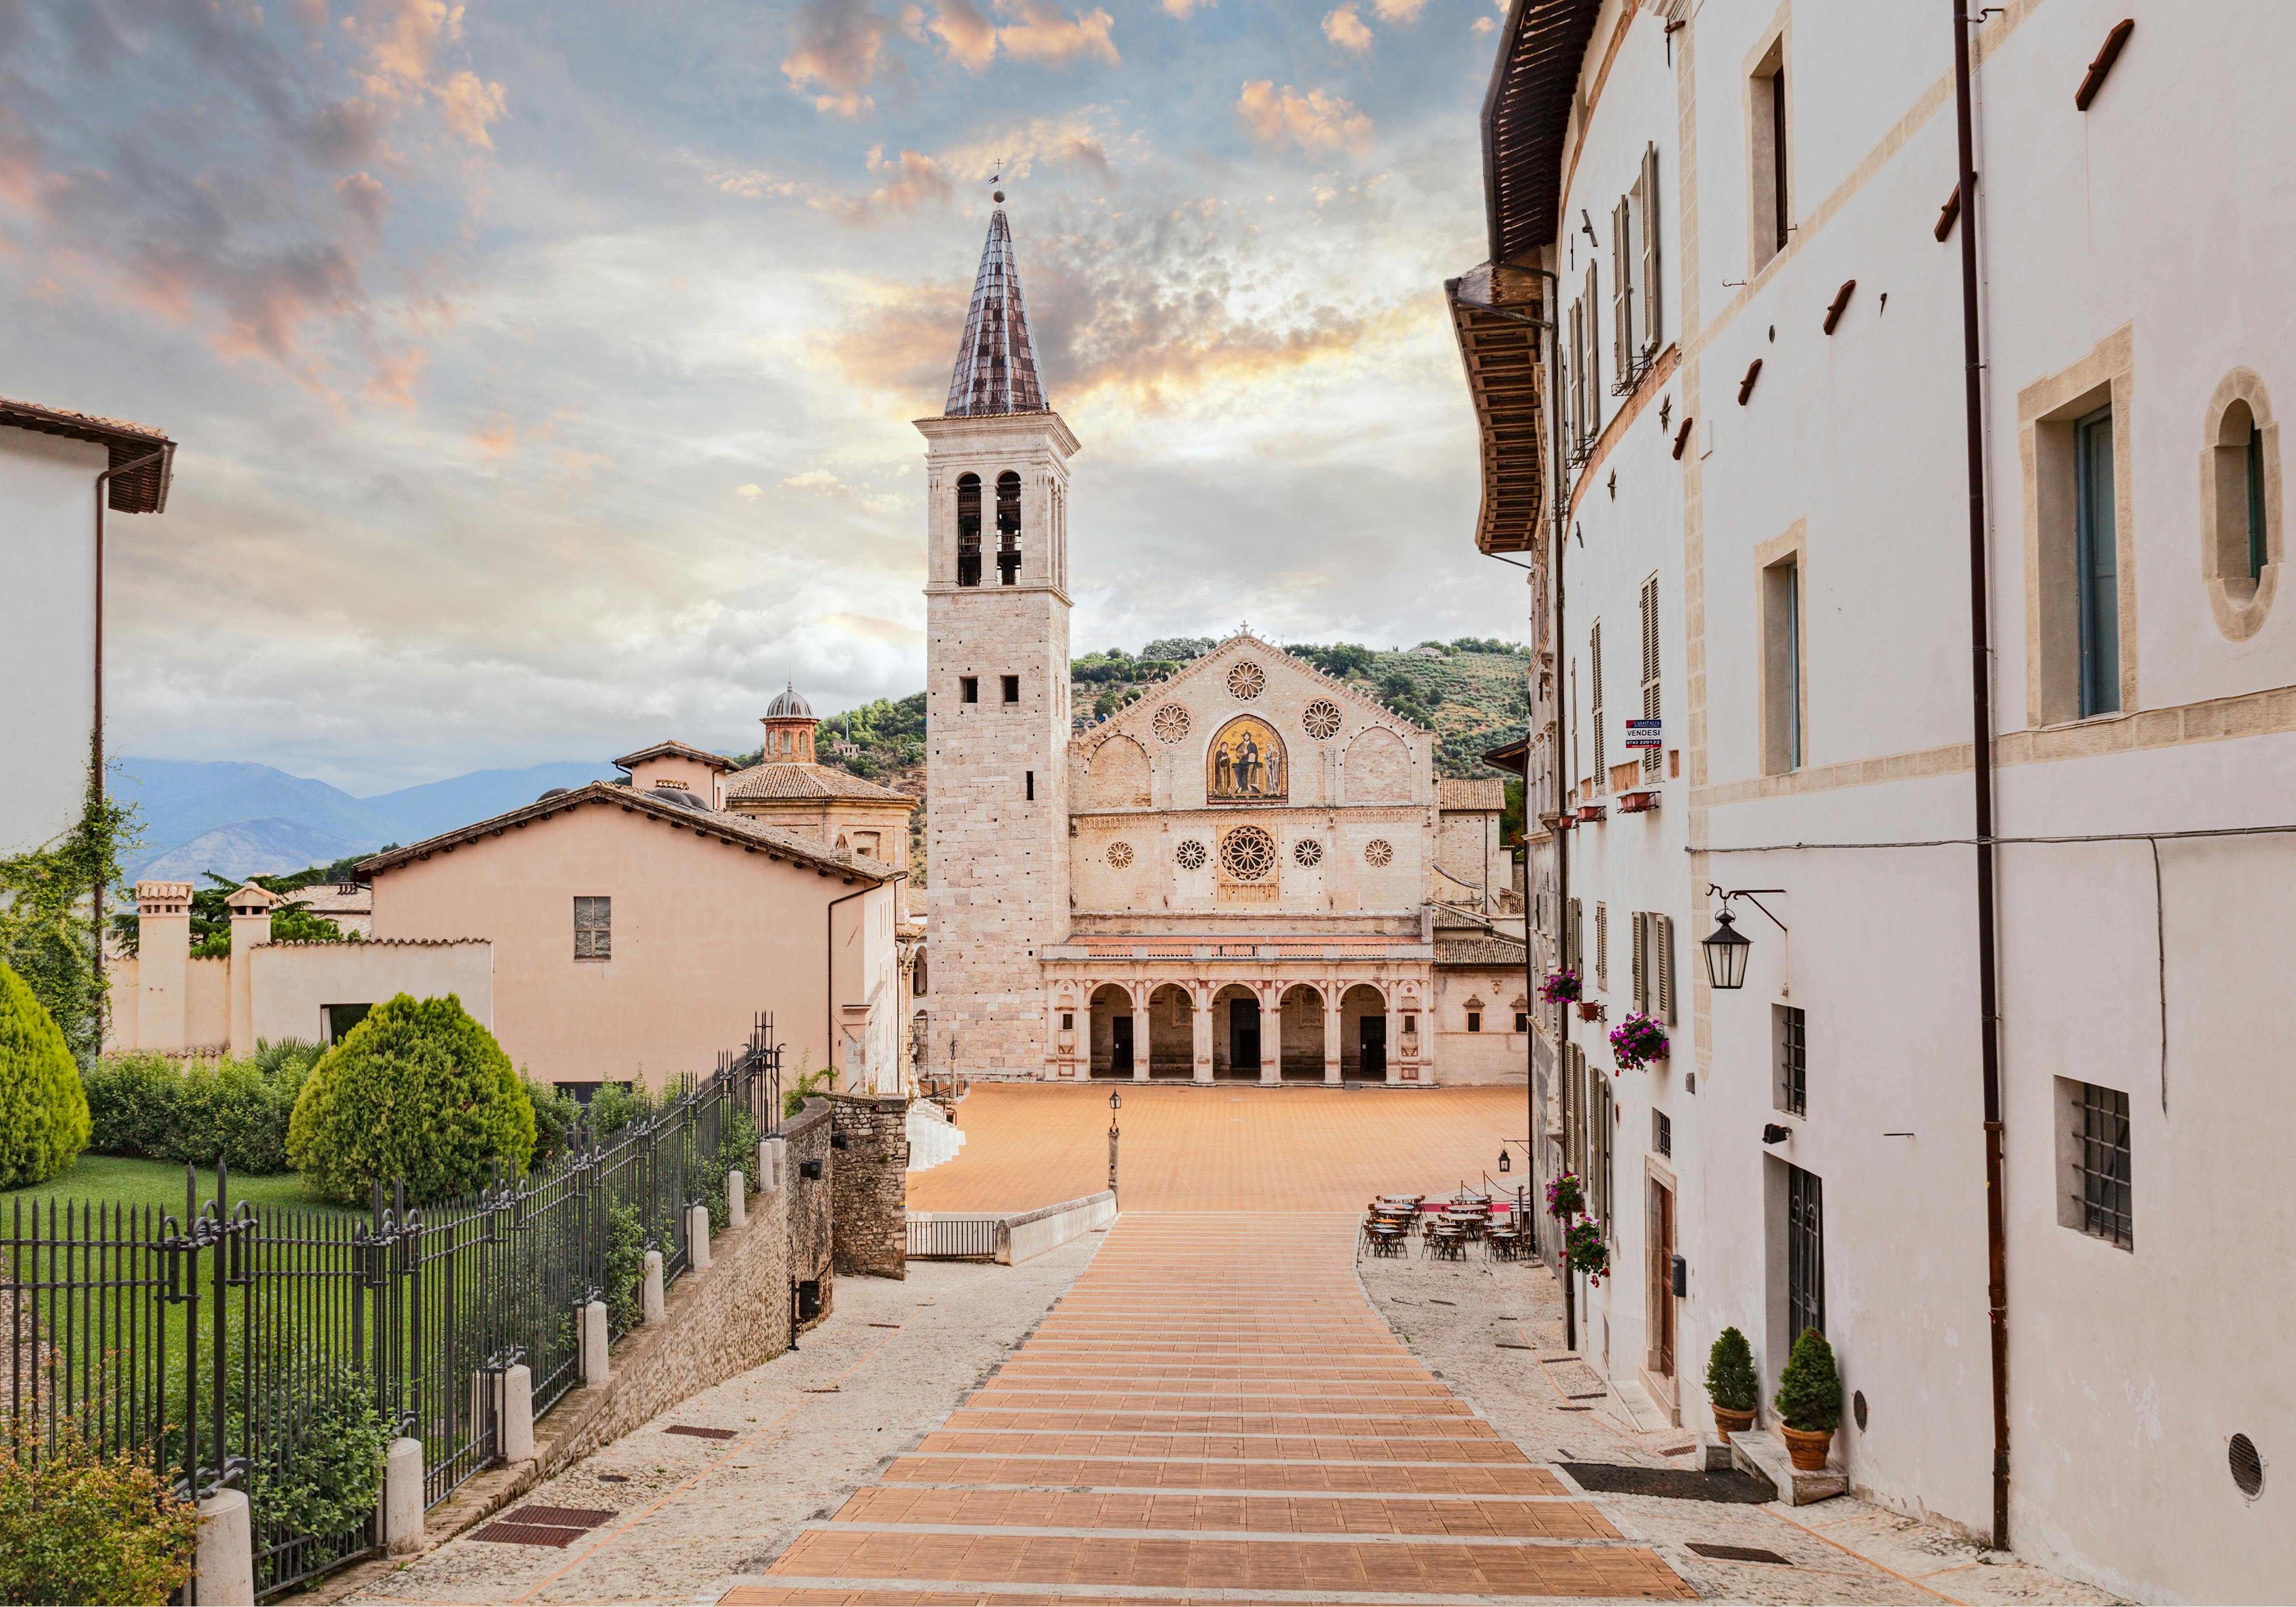 Tickets and audio guide for the Spoleto Cathedral monumental complex Musement